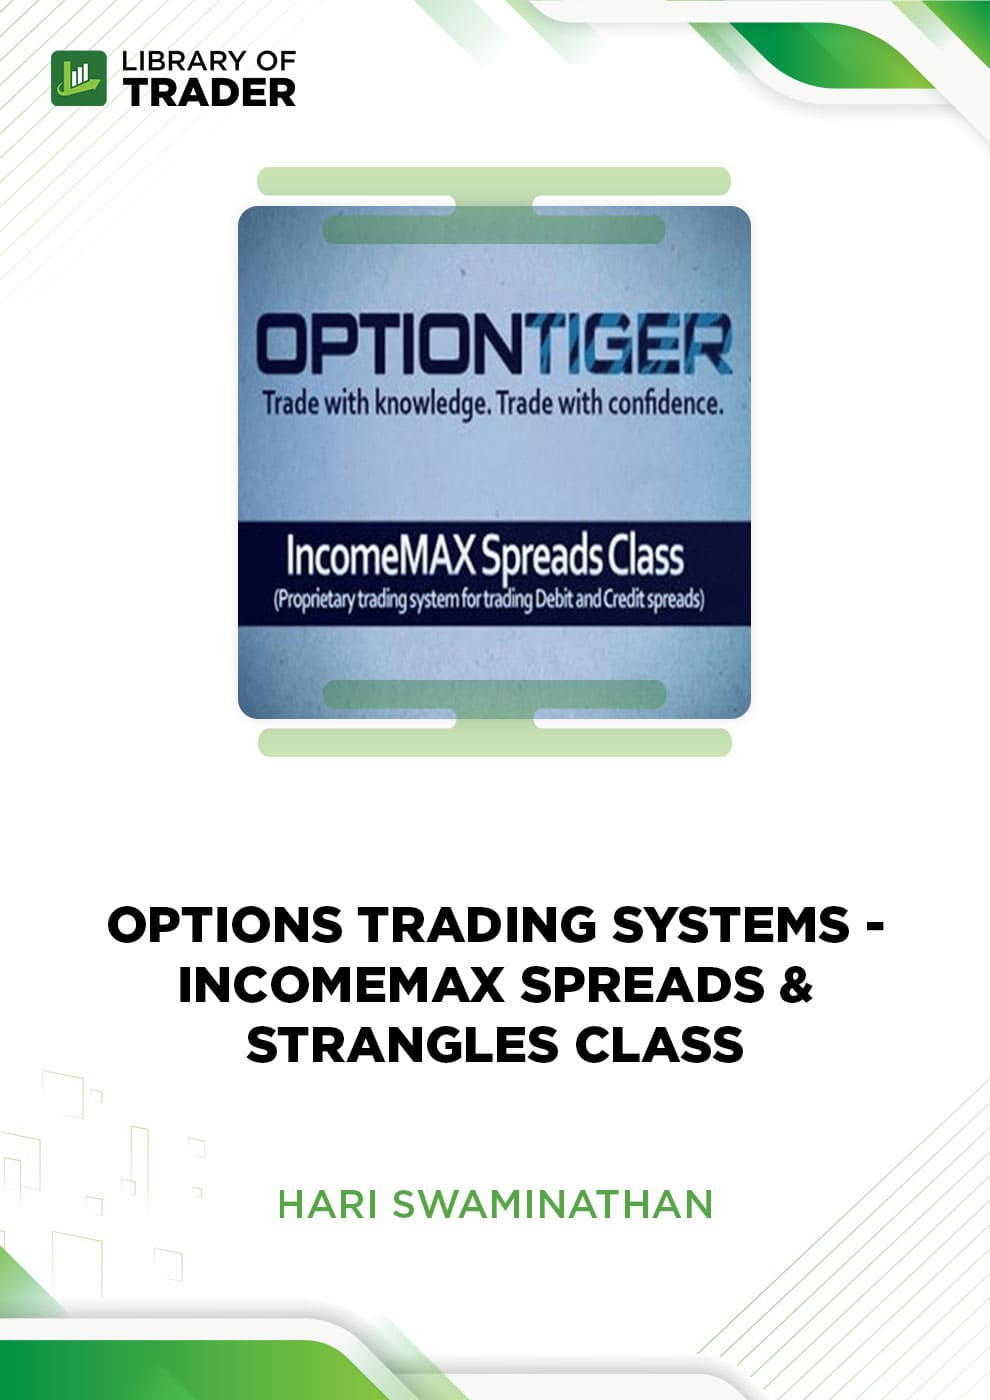 IncomeMAX Spreads & Straddles Class by Hari Swaminathan